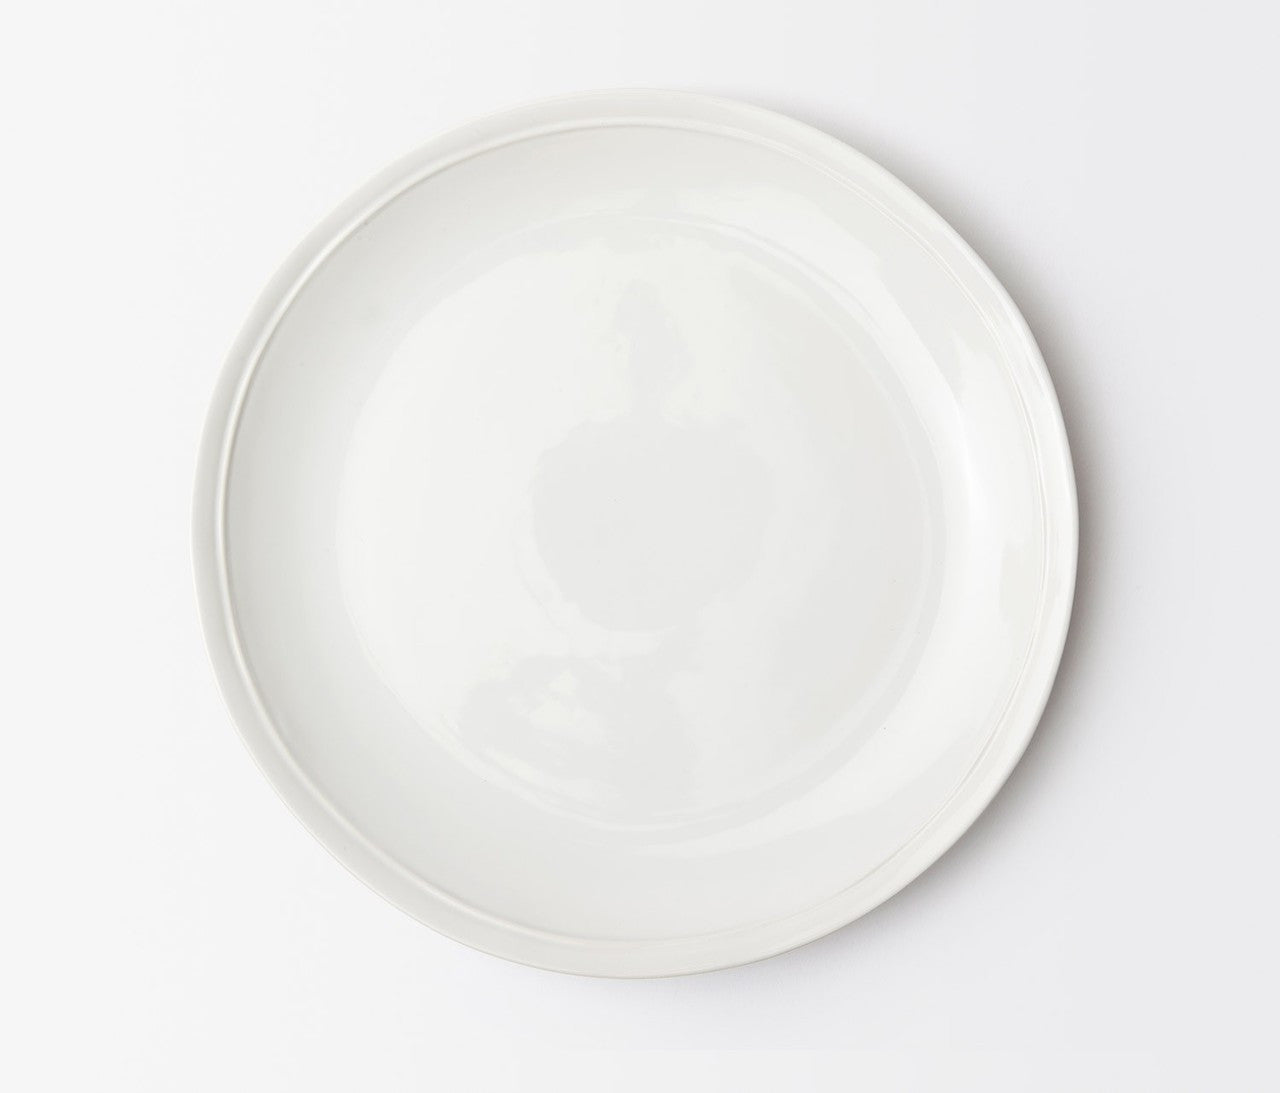 Ariana White Charger Plate - RSVP Style